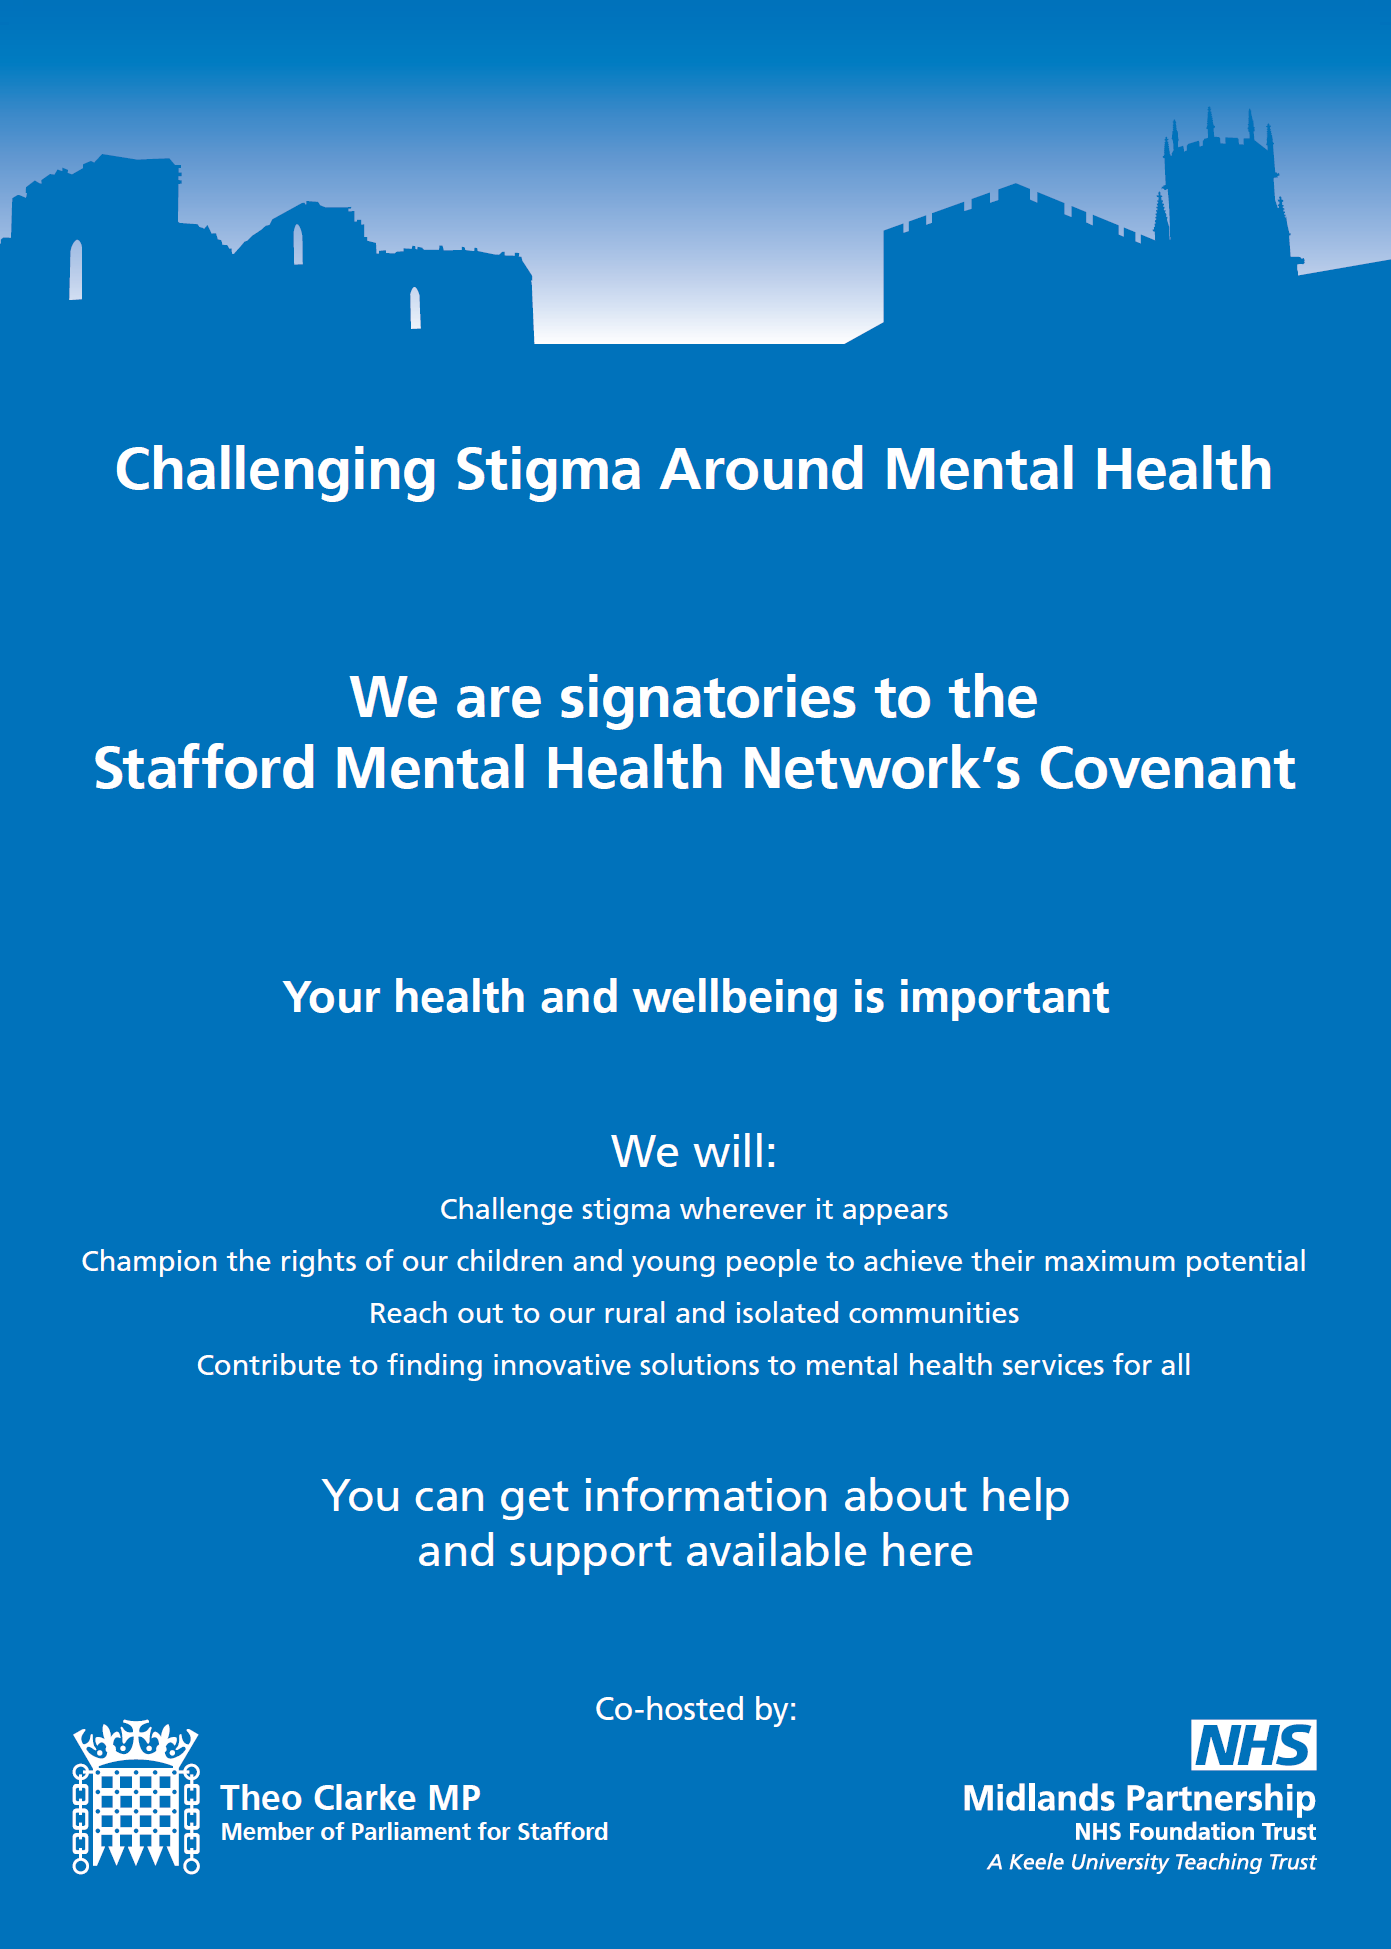 Stafford Mental Health Network's Covenant